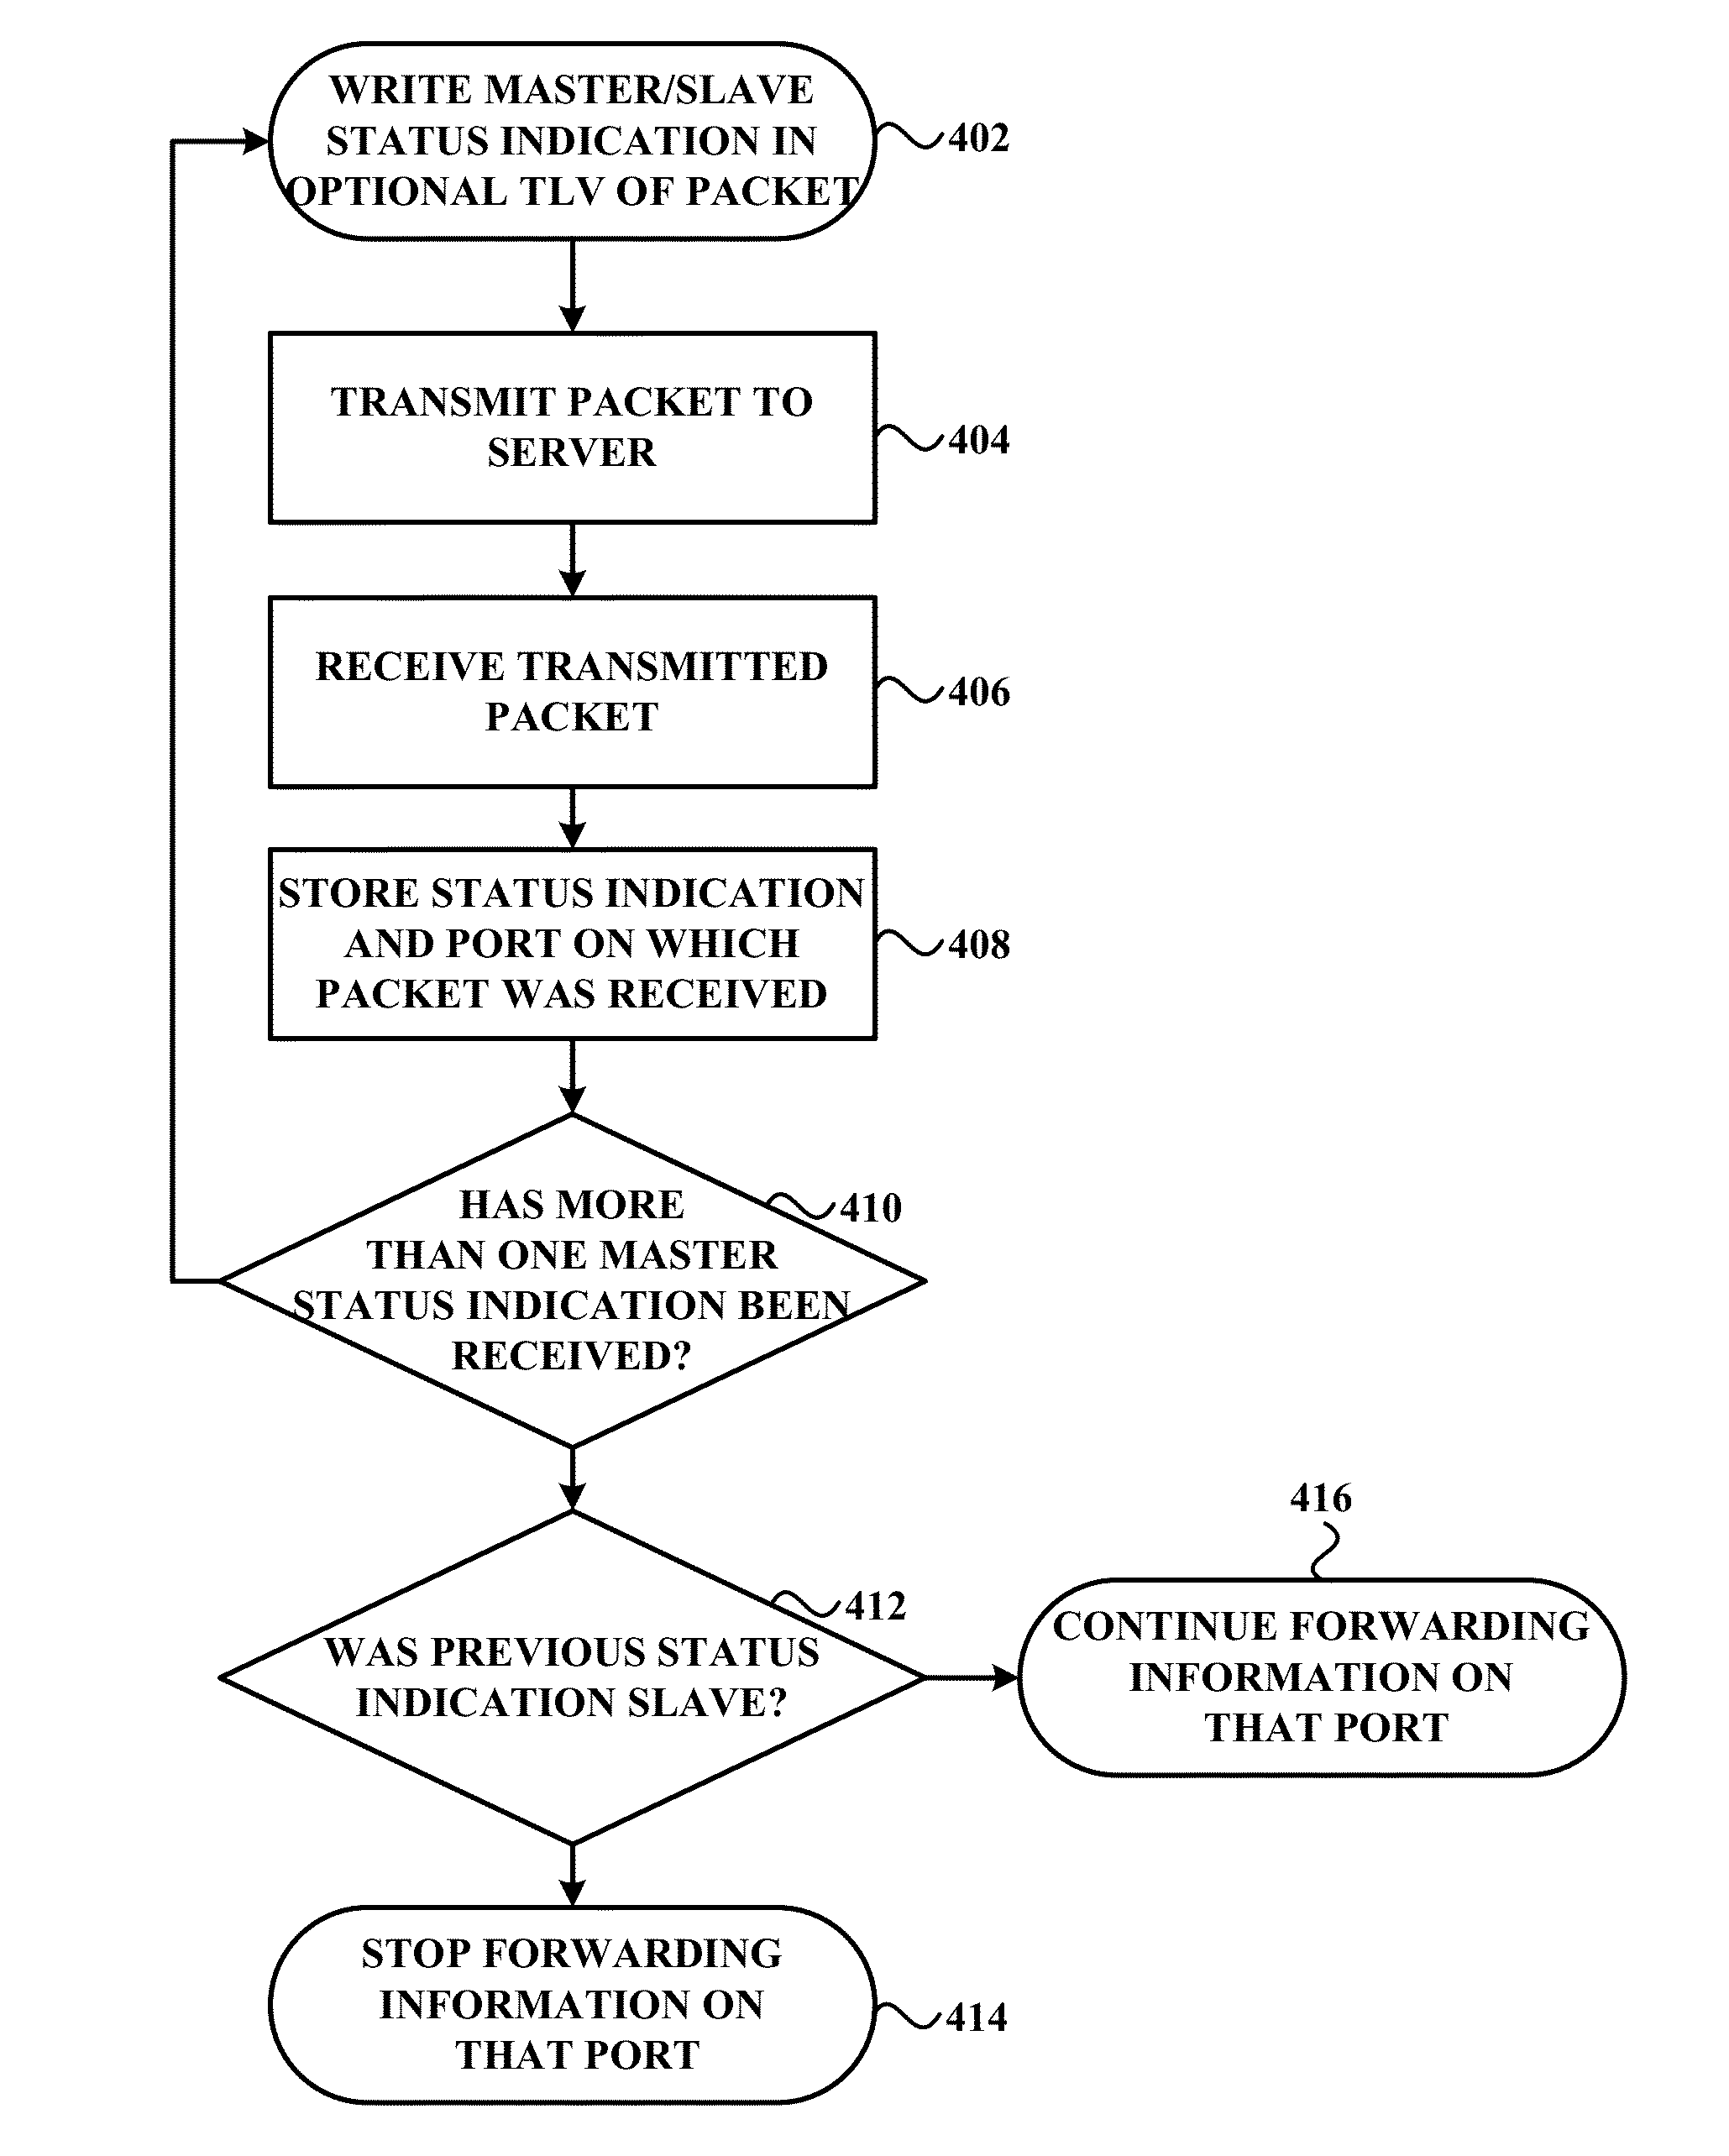 Systems and methods for reducing information loss in an aggregated information handling system